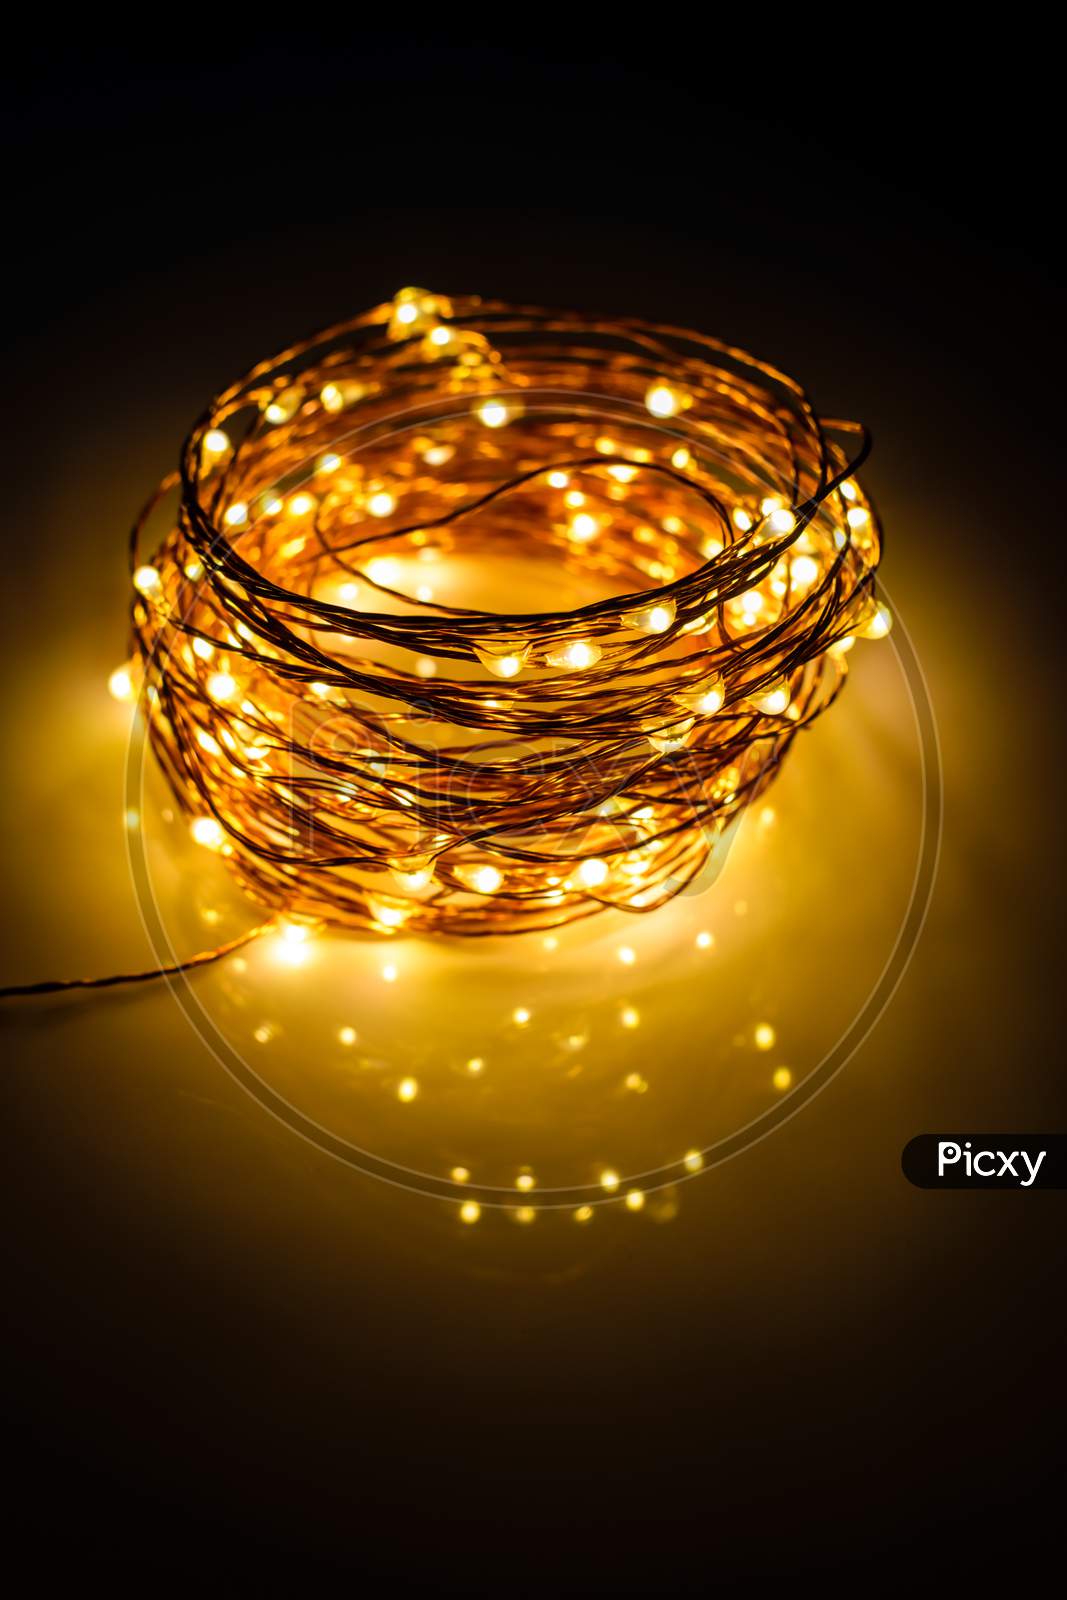 Yellow Colored Light Chain For Decoration Placed On A Reflective Surface. Portrait View